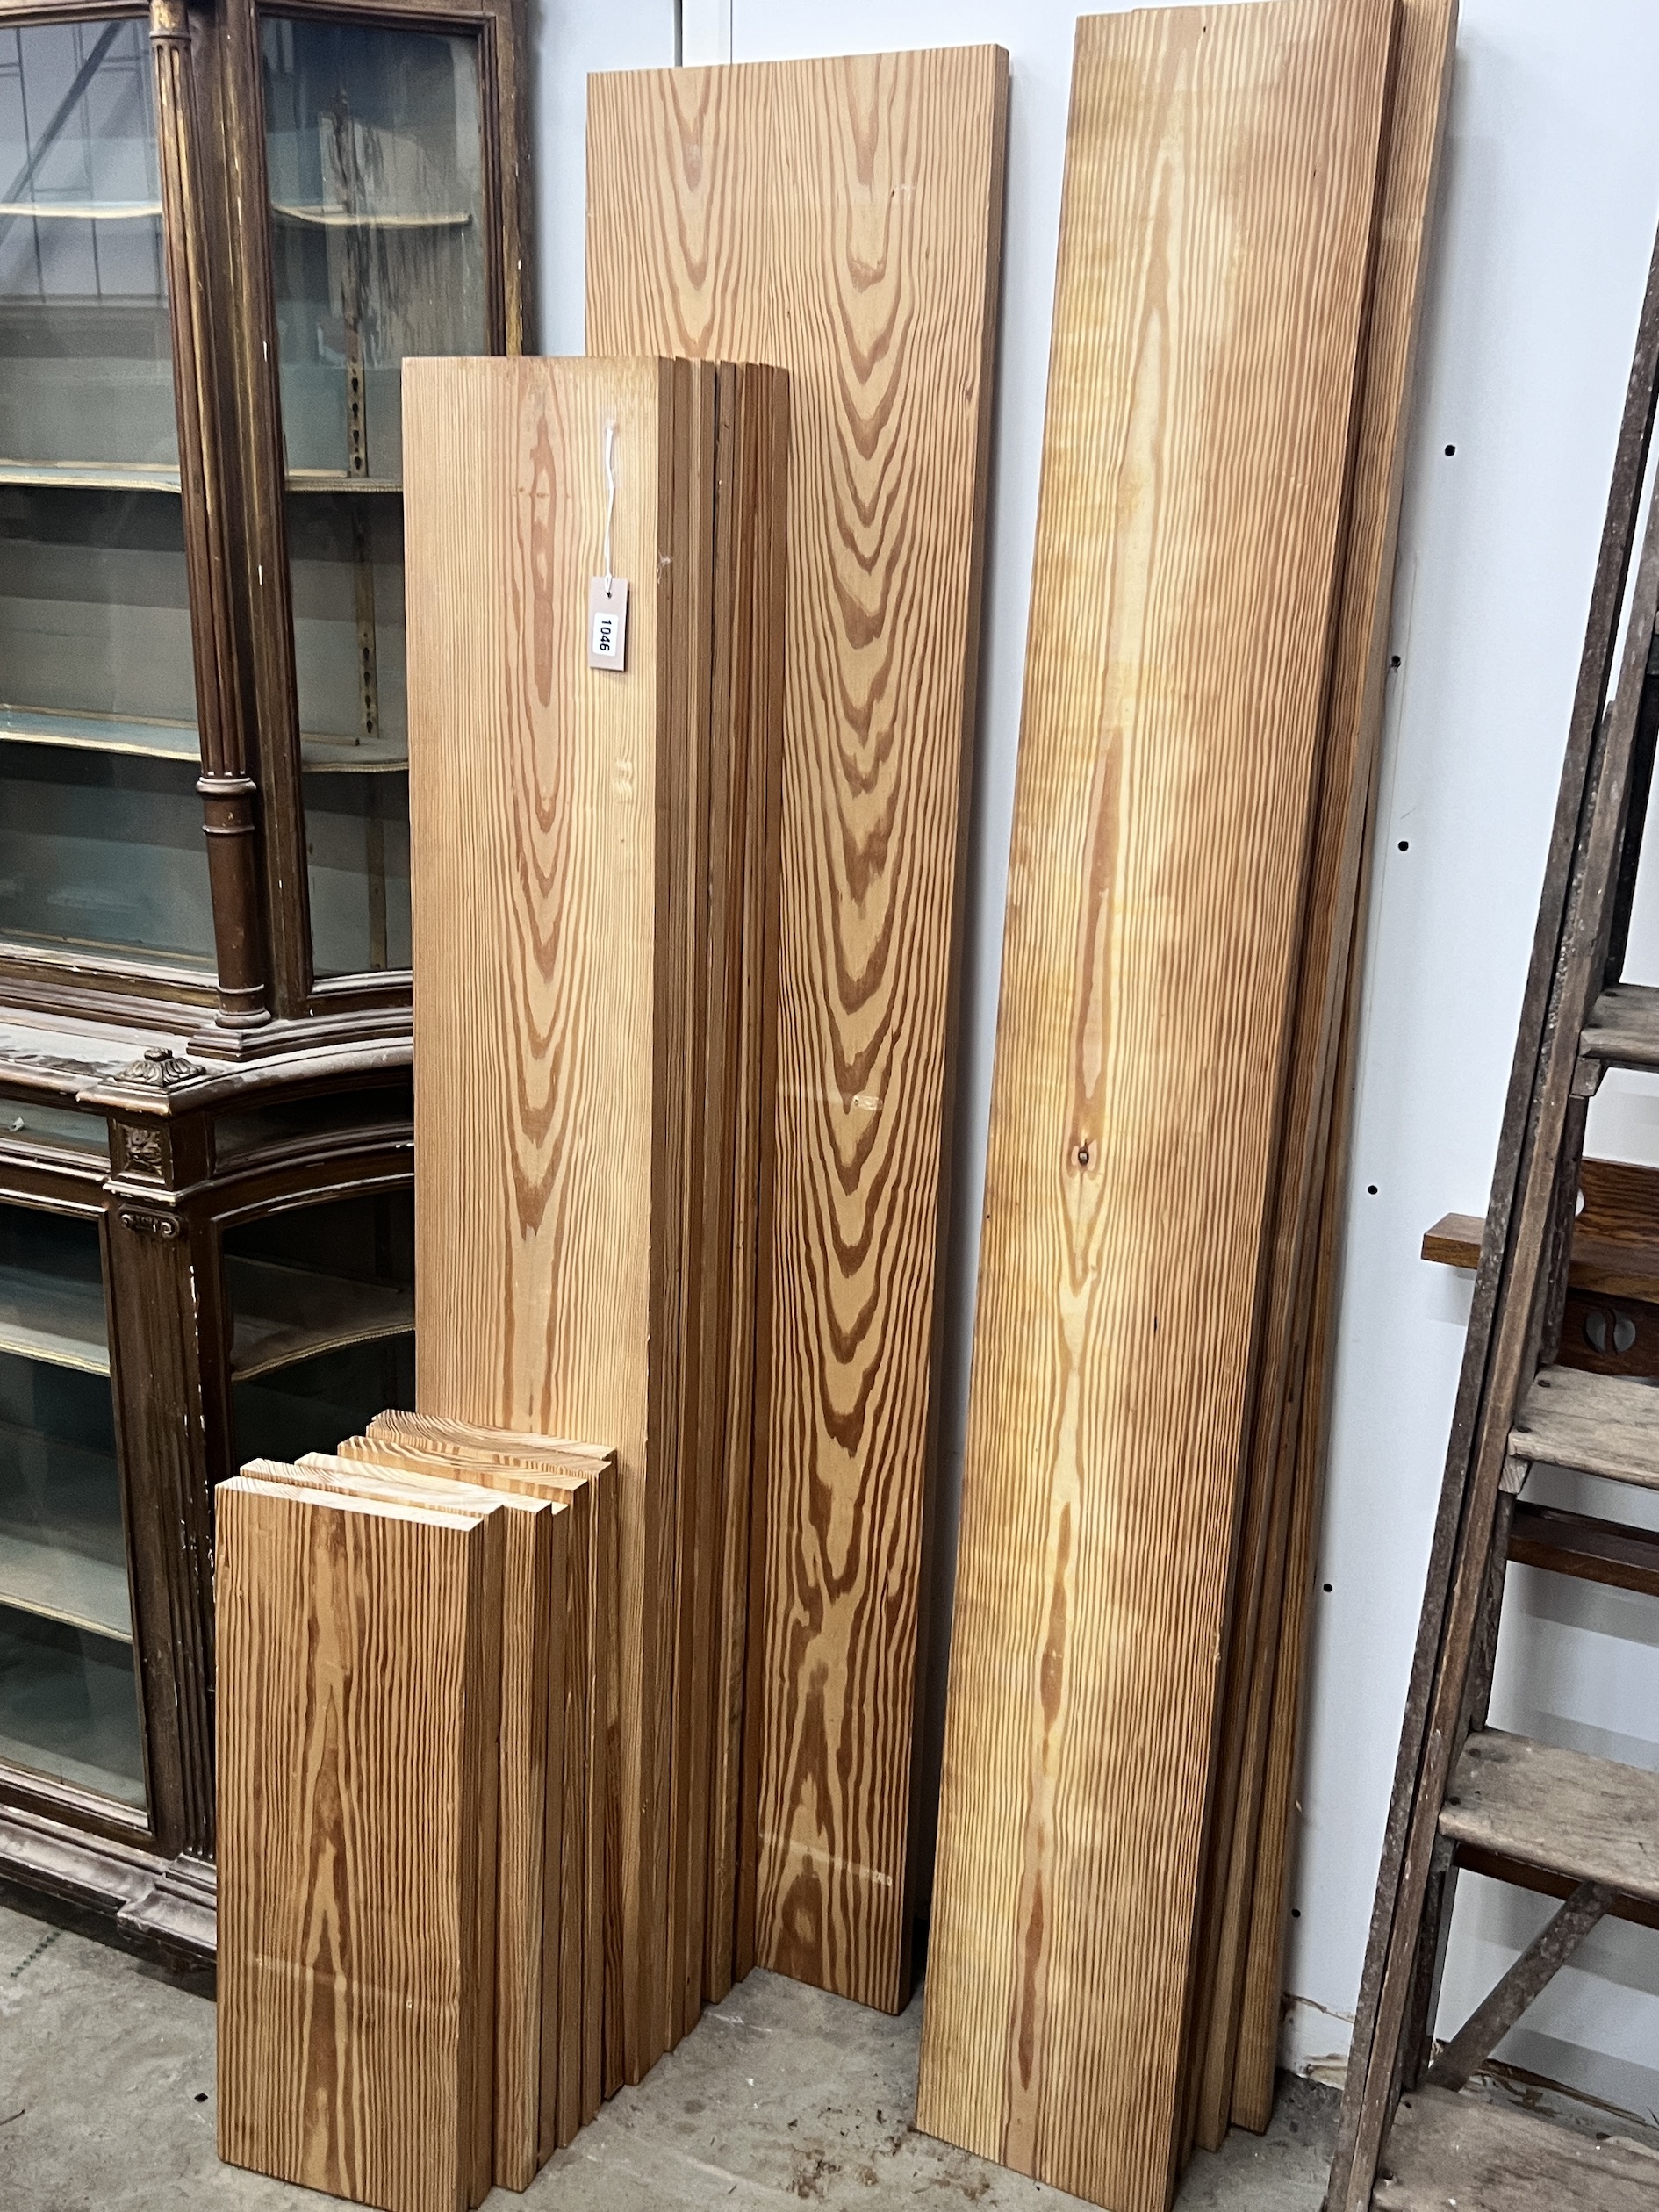 Nineteen lengths of 'Parana' pine boards, largest piece width 38cm, height 176cm